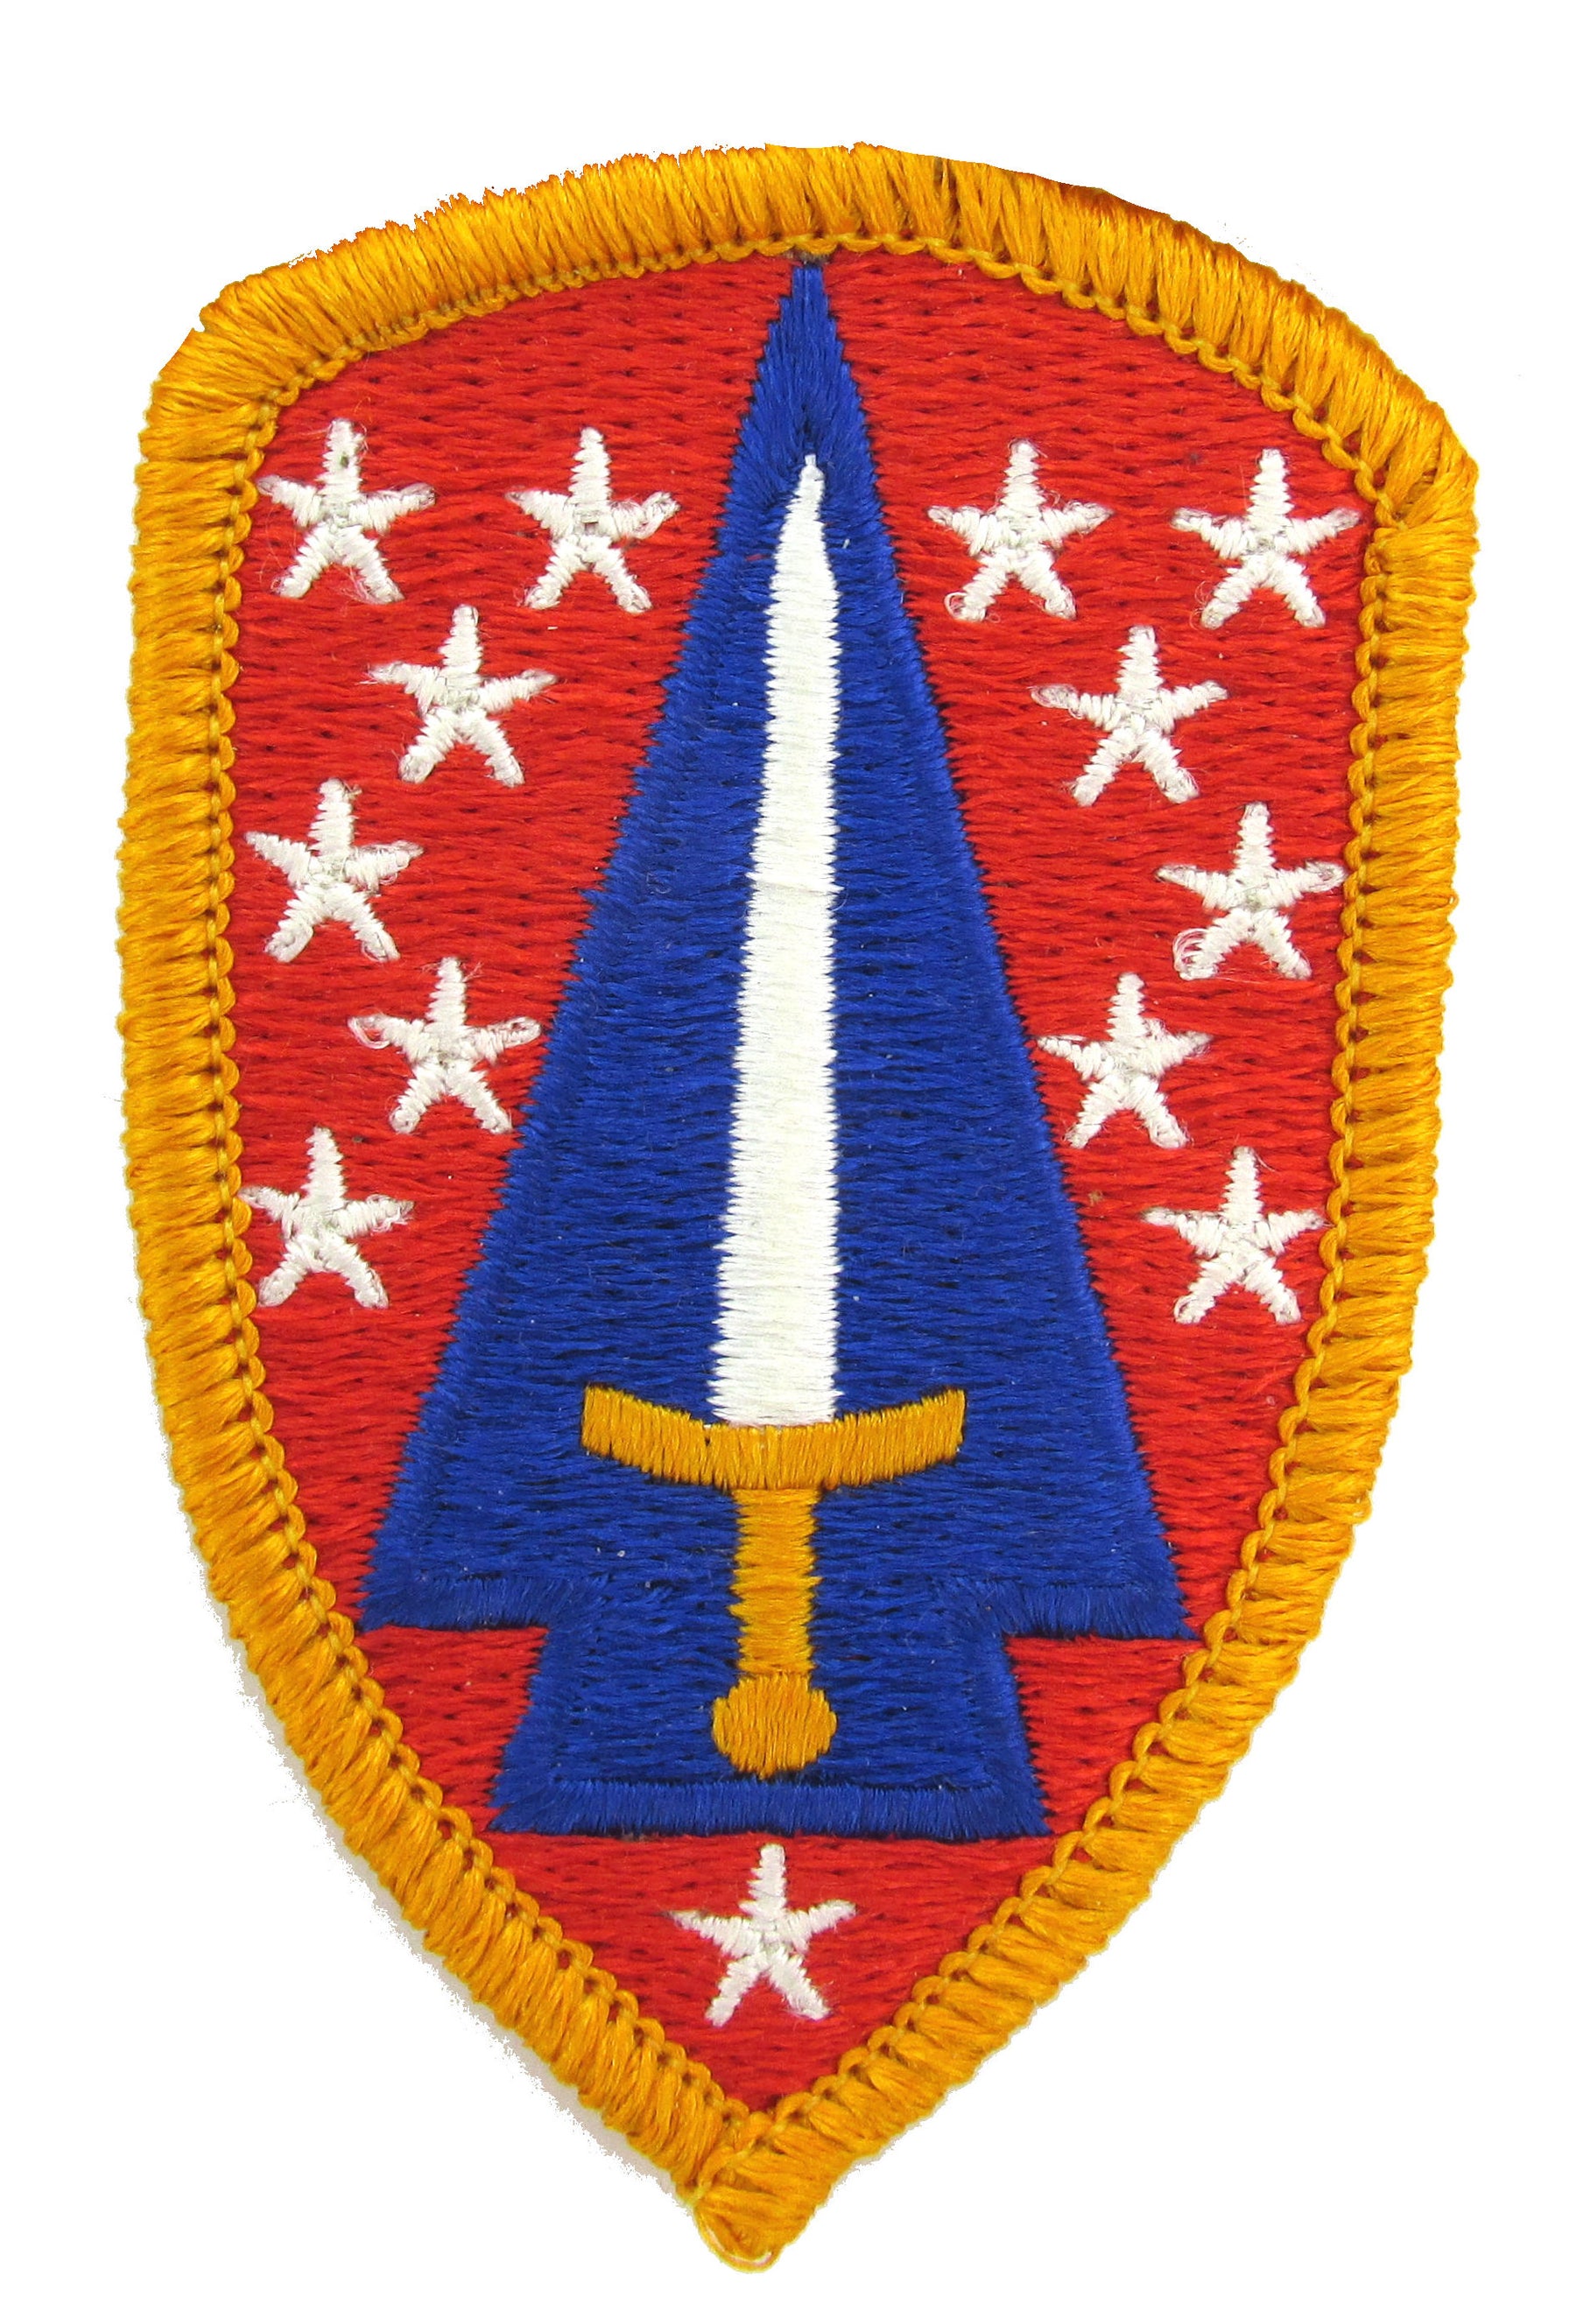 U.S. Army Security Force Assistance Brigade Patch